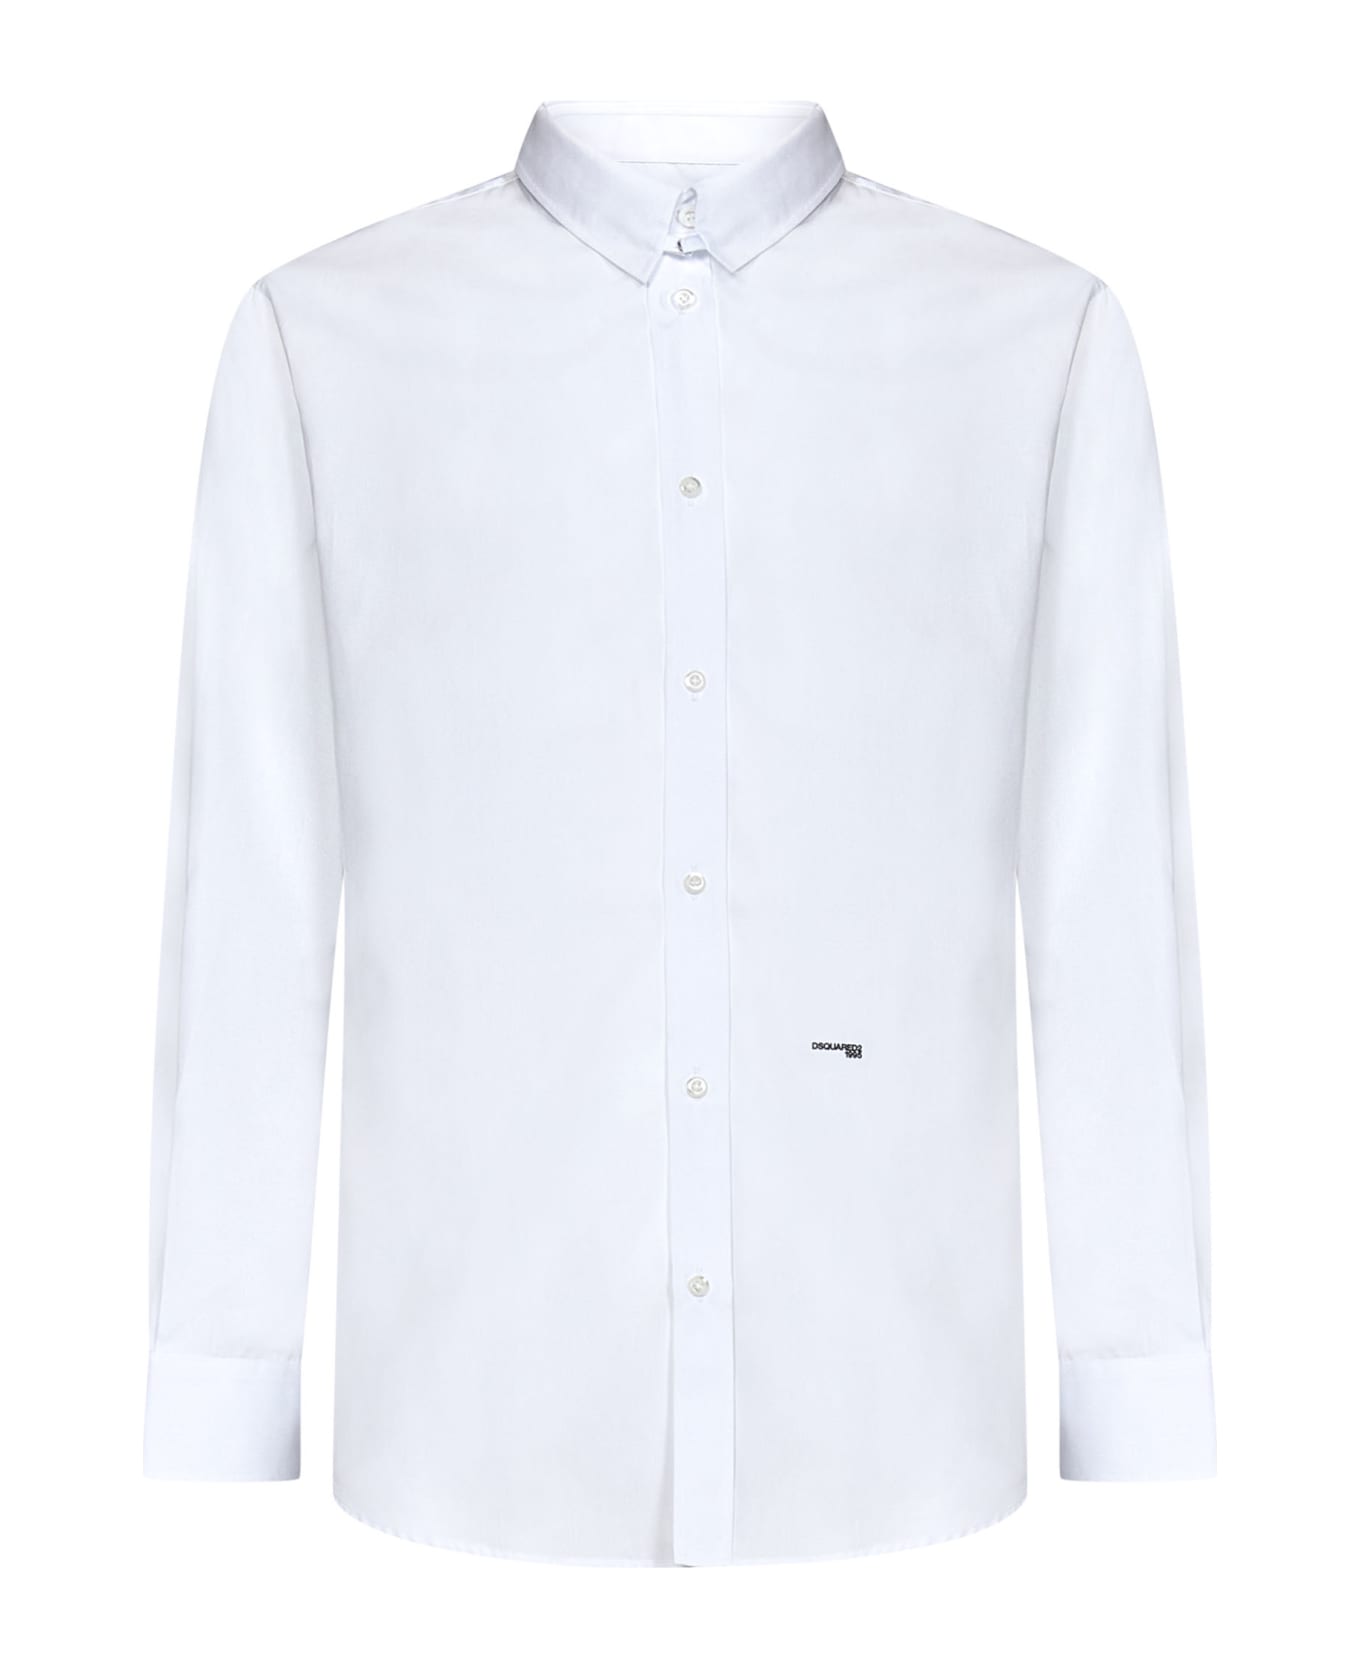 Dsquared2 Tab Collar Relaxed Dan Shirt - White